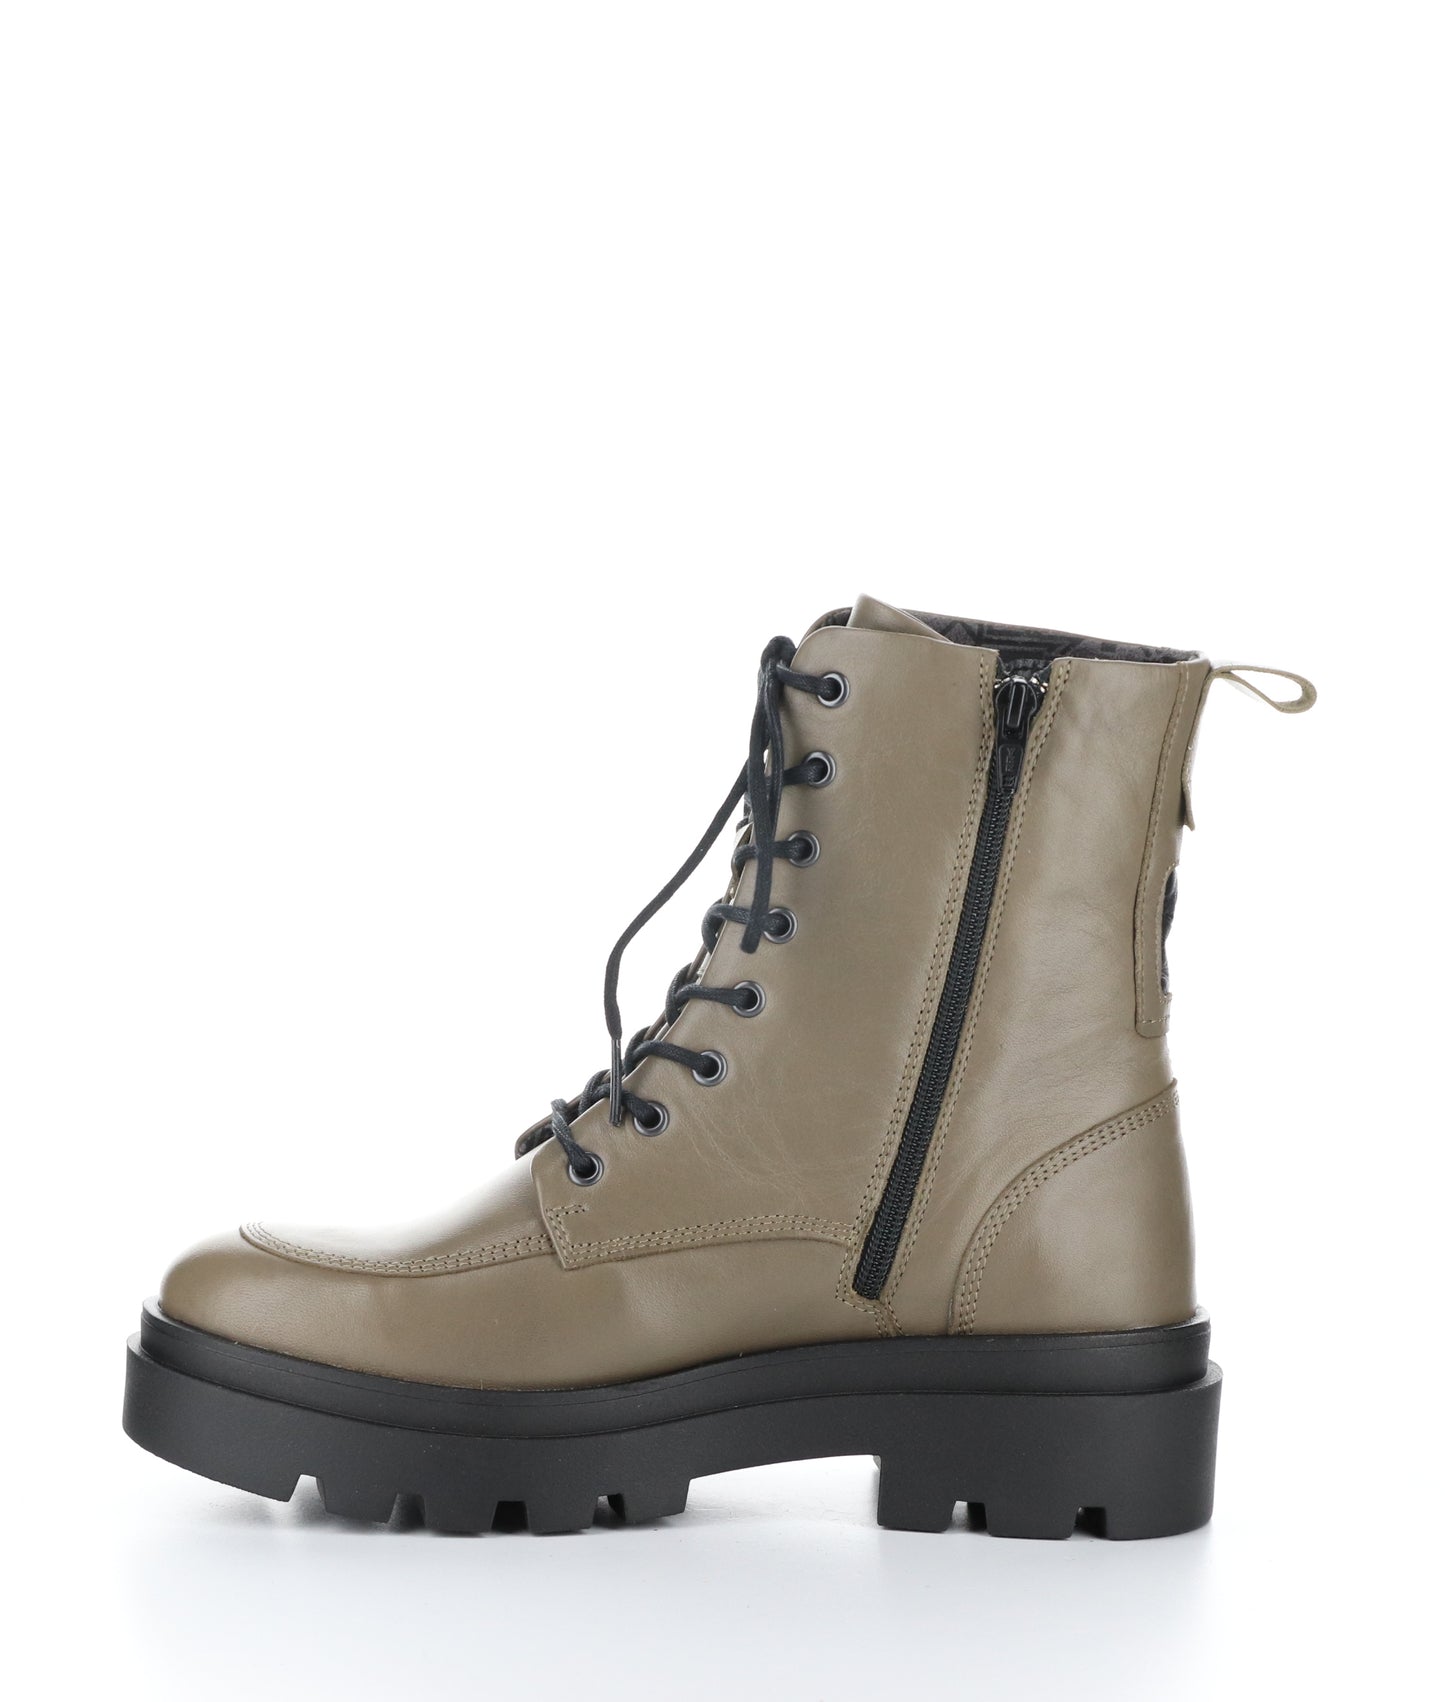 Pictured is the left profile view of a taupe coloured, army style boot. This view shows the zippered entry as well as the lace up detail and lug sole.